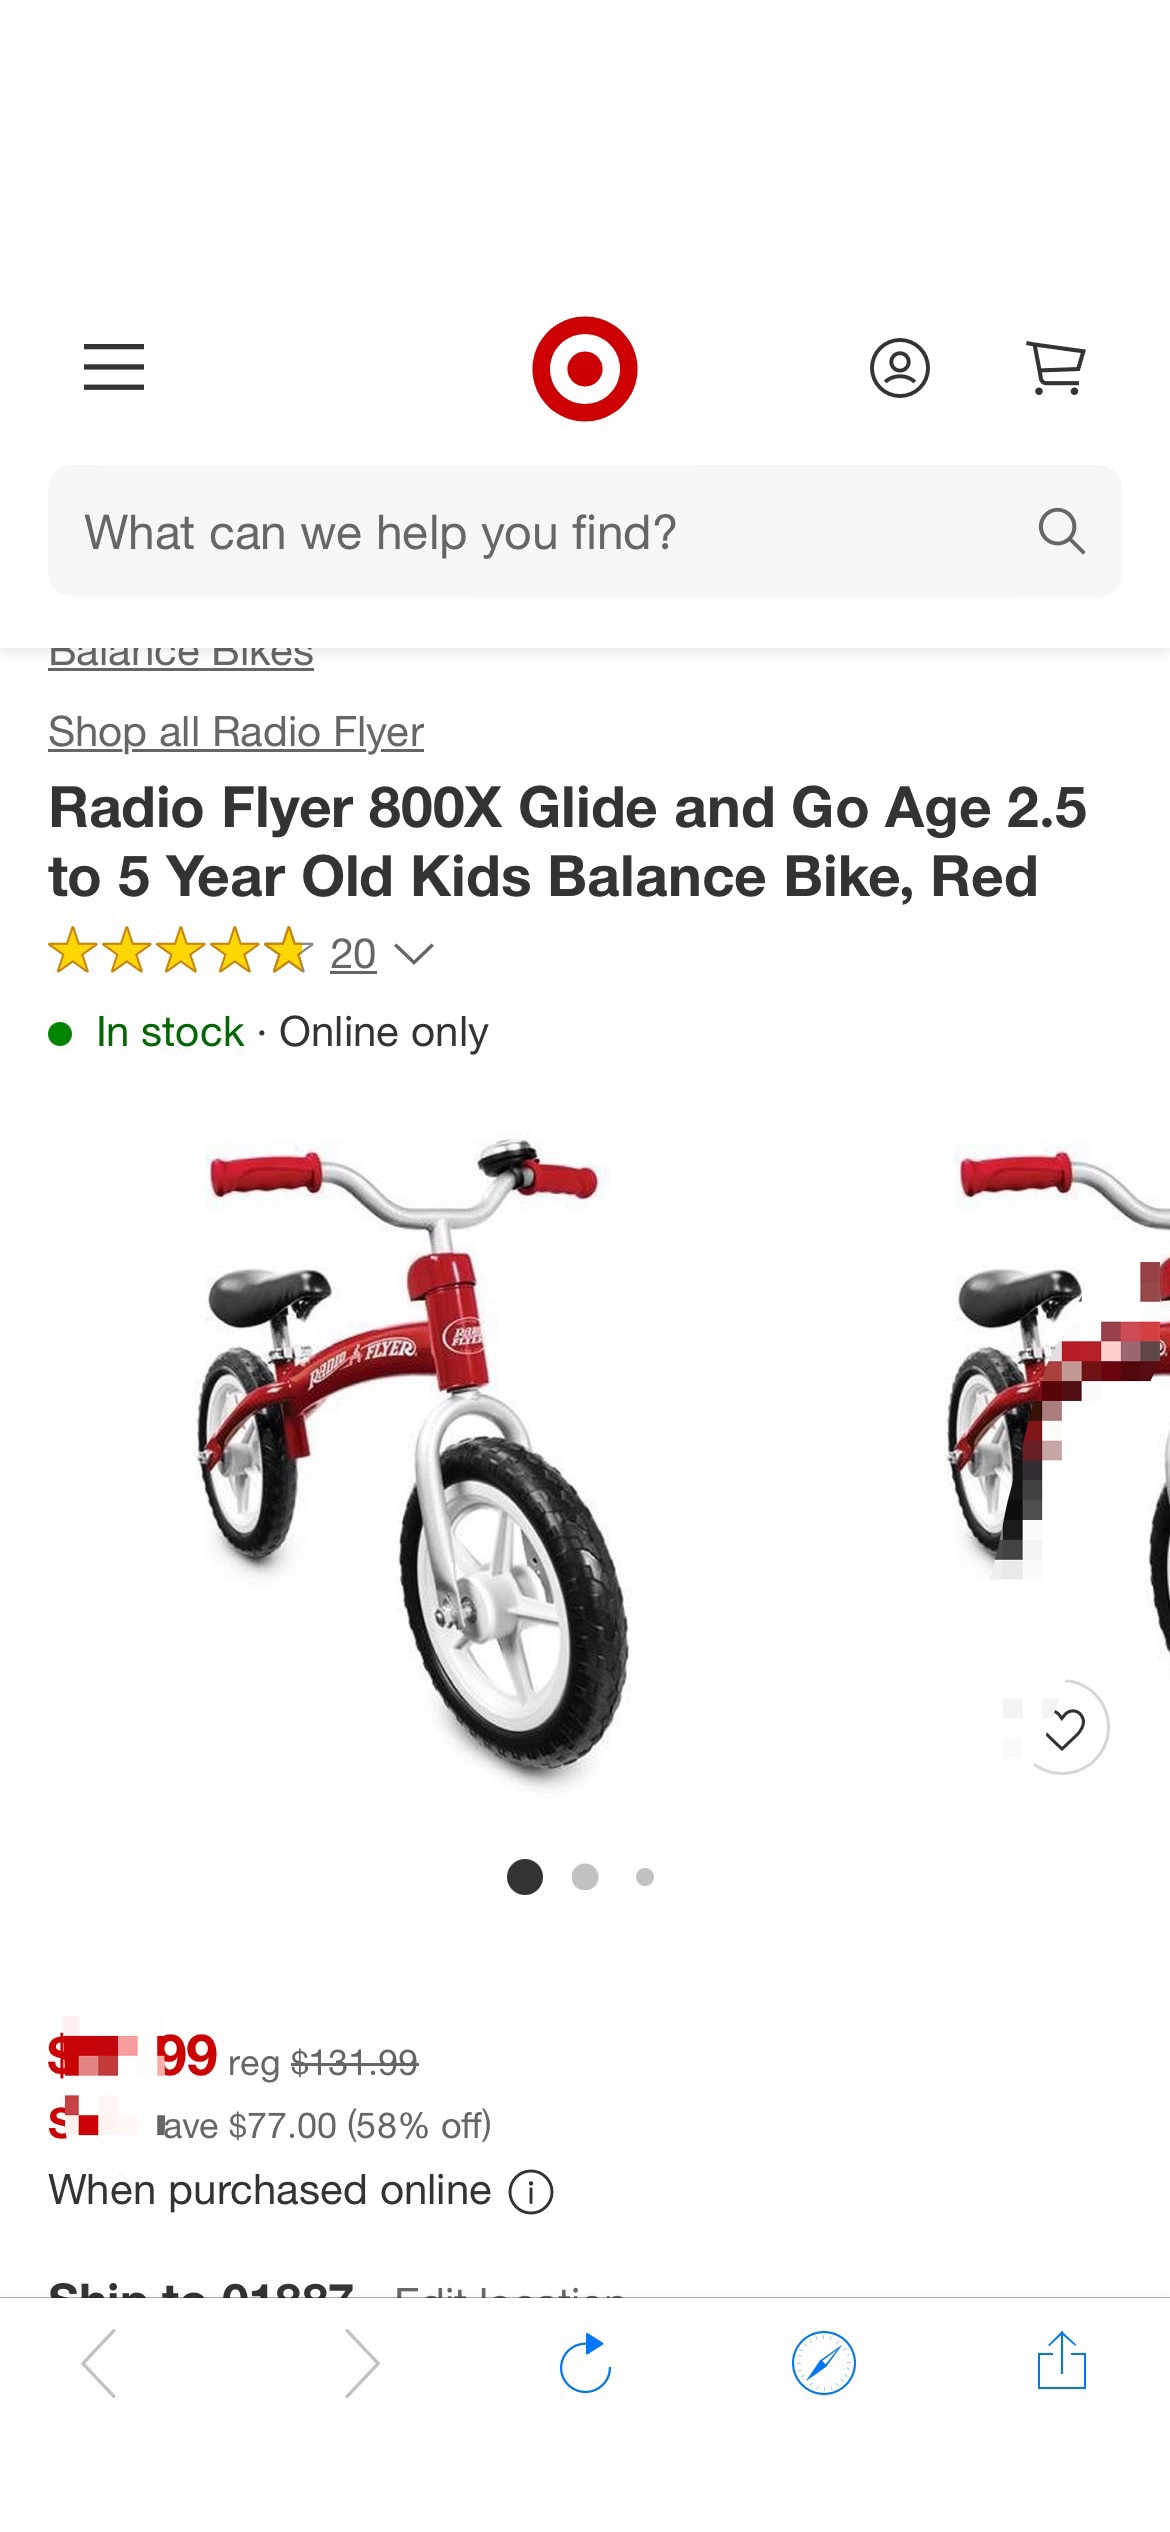 Radio Flyer 800x Glide And Go Age 2.5 To 5 Year Old Kids Balance Bike, Red : Target